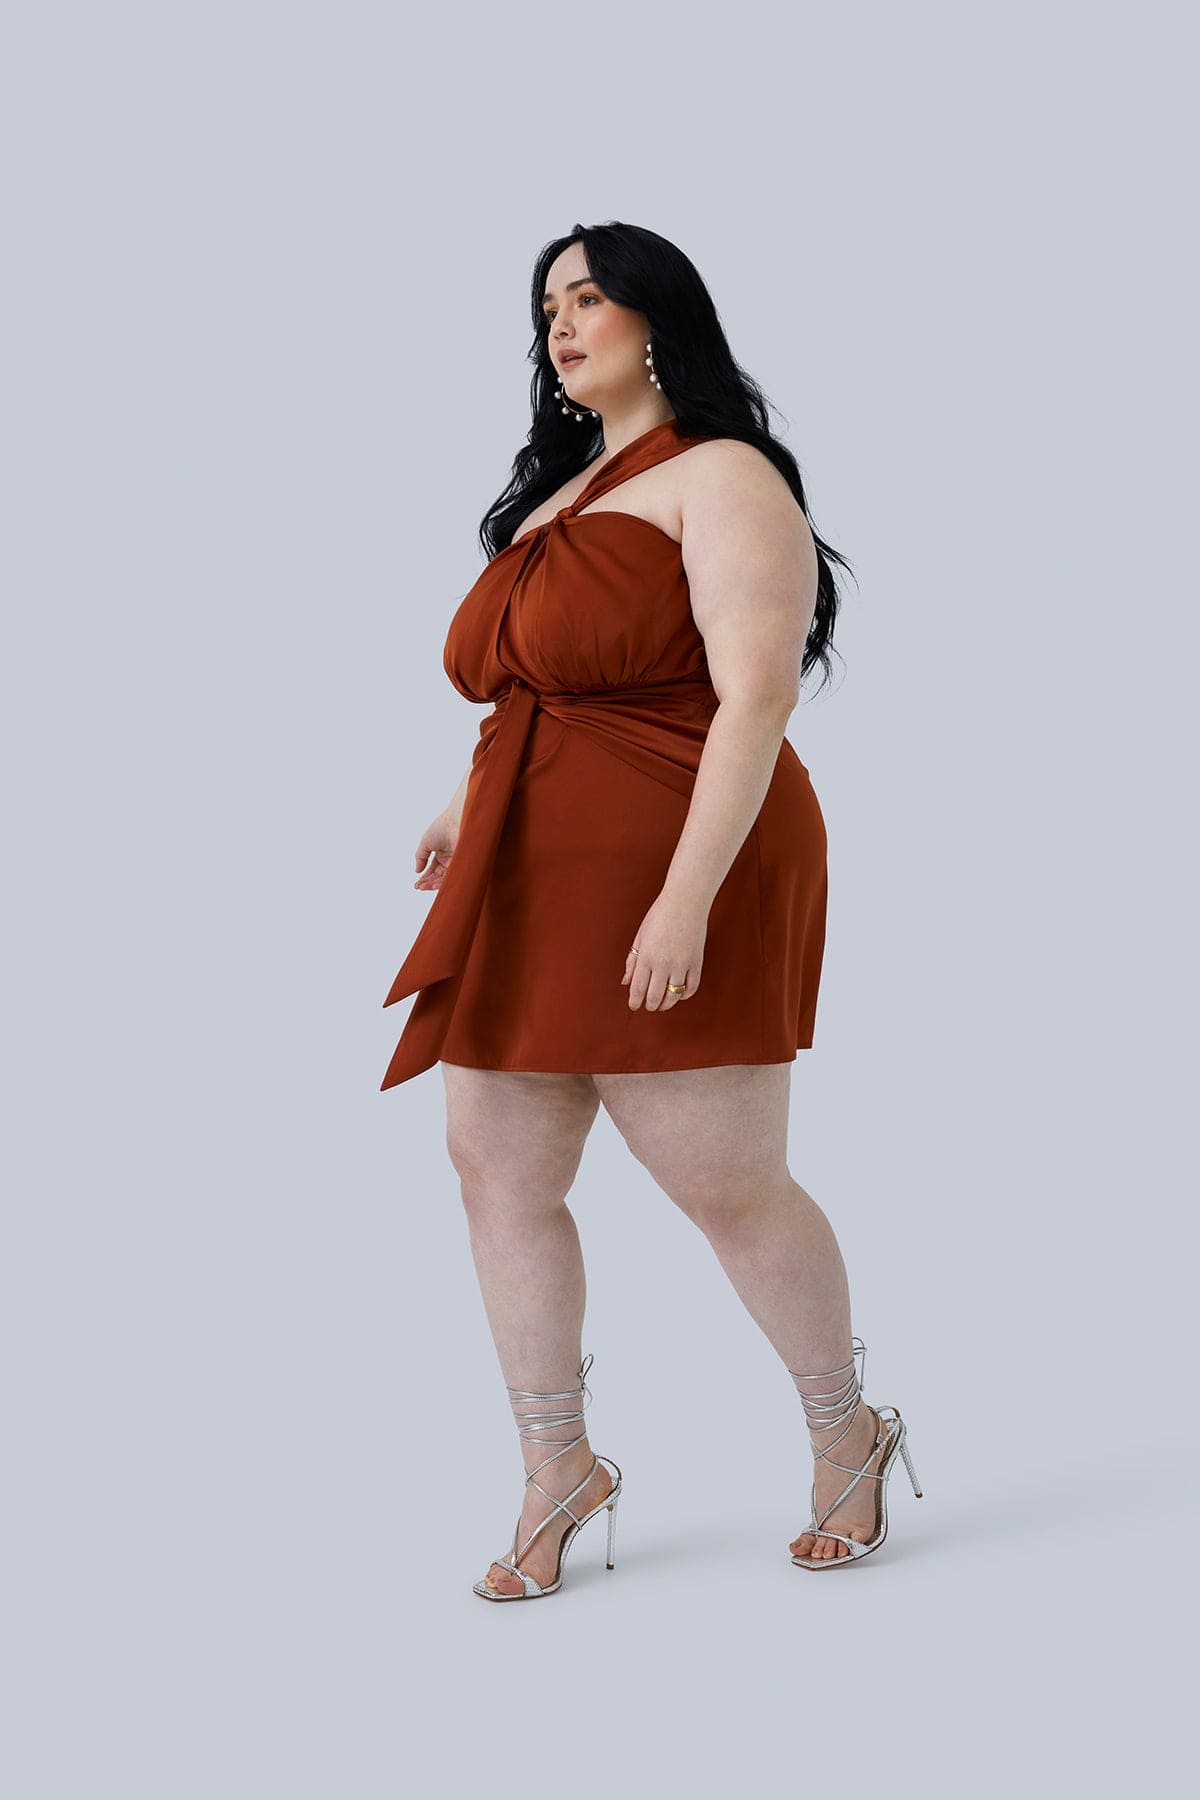 Full body shot of the Maya Mini Dress from Gia IRL Plus Size Boutique. Dress is silk and rust color, worn with strappy heals by plus size model with long dark hair size 18.